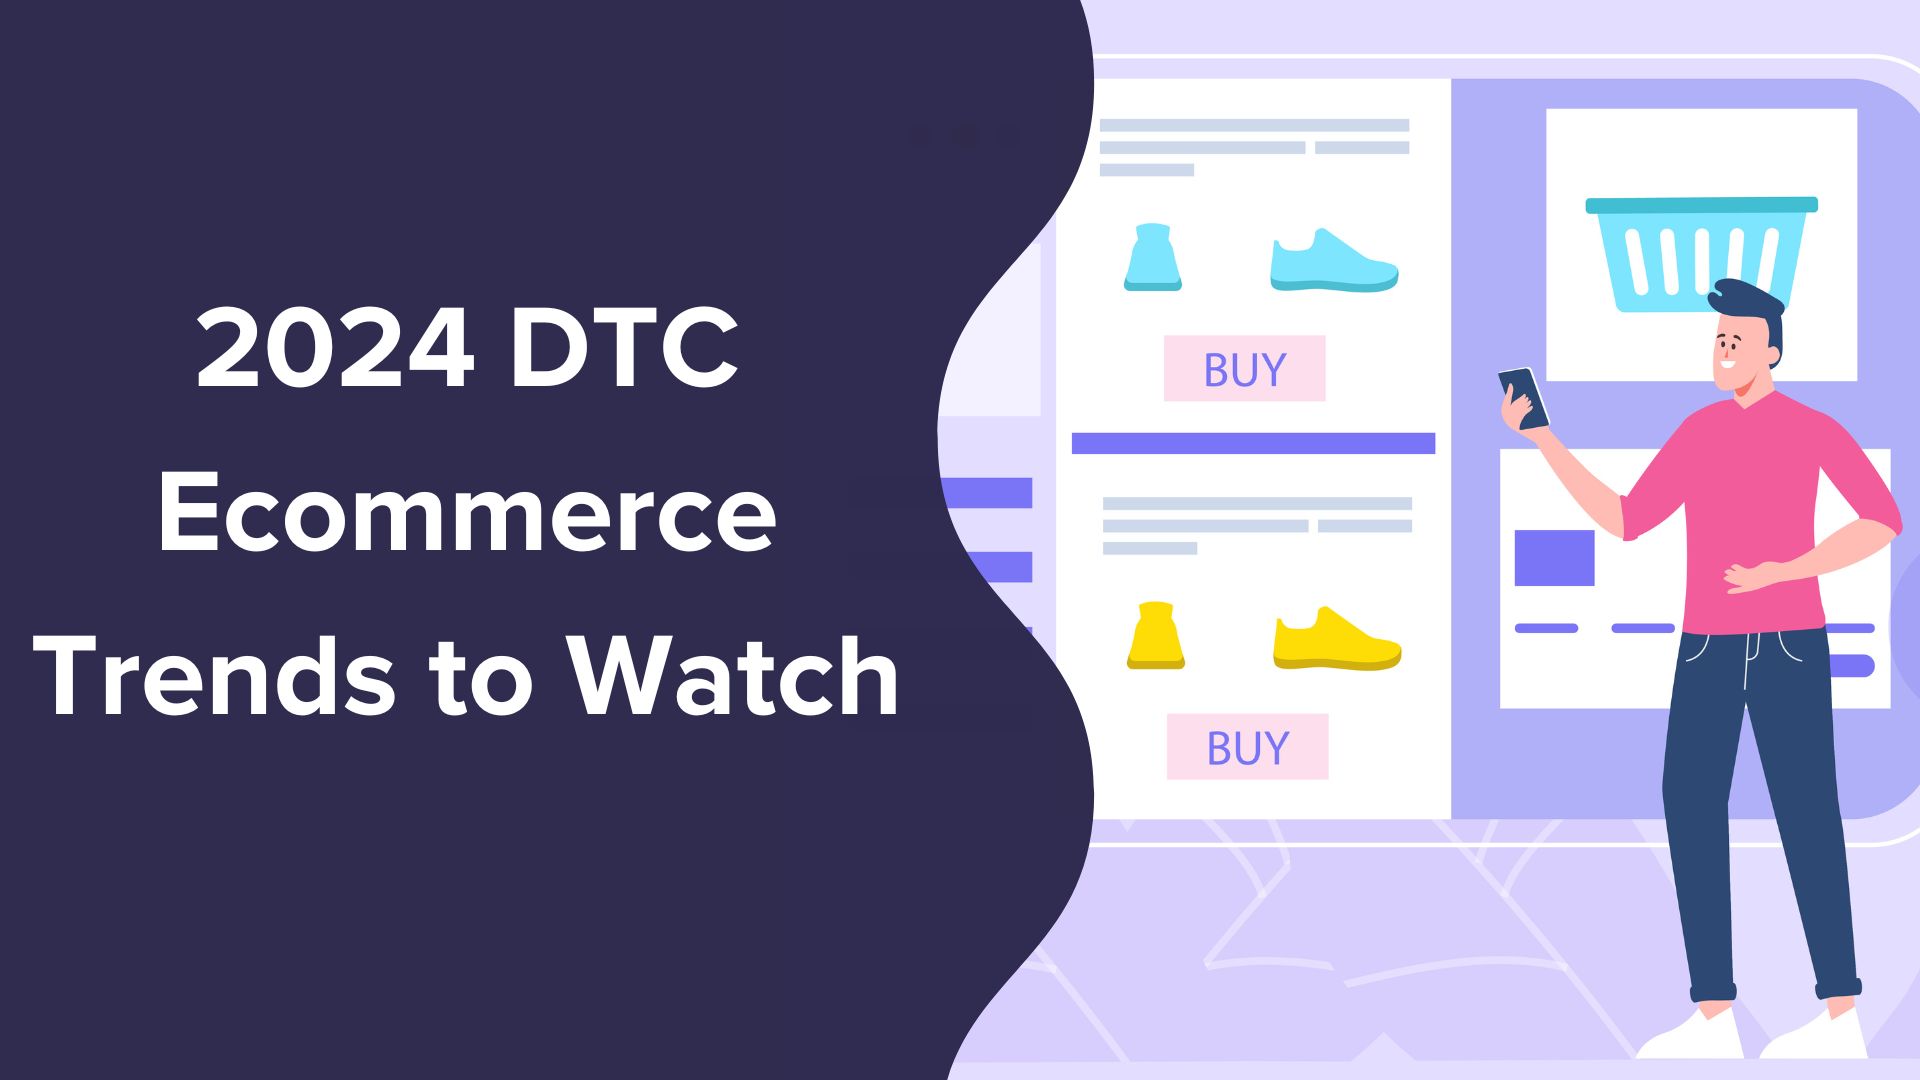 2024 DTC Ecommerce Trends to Watch